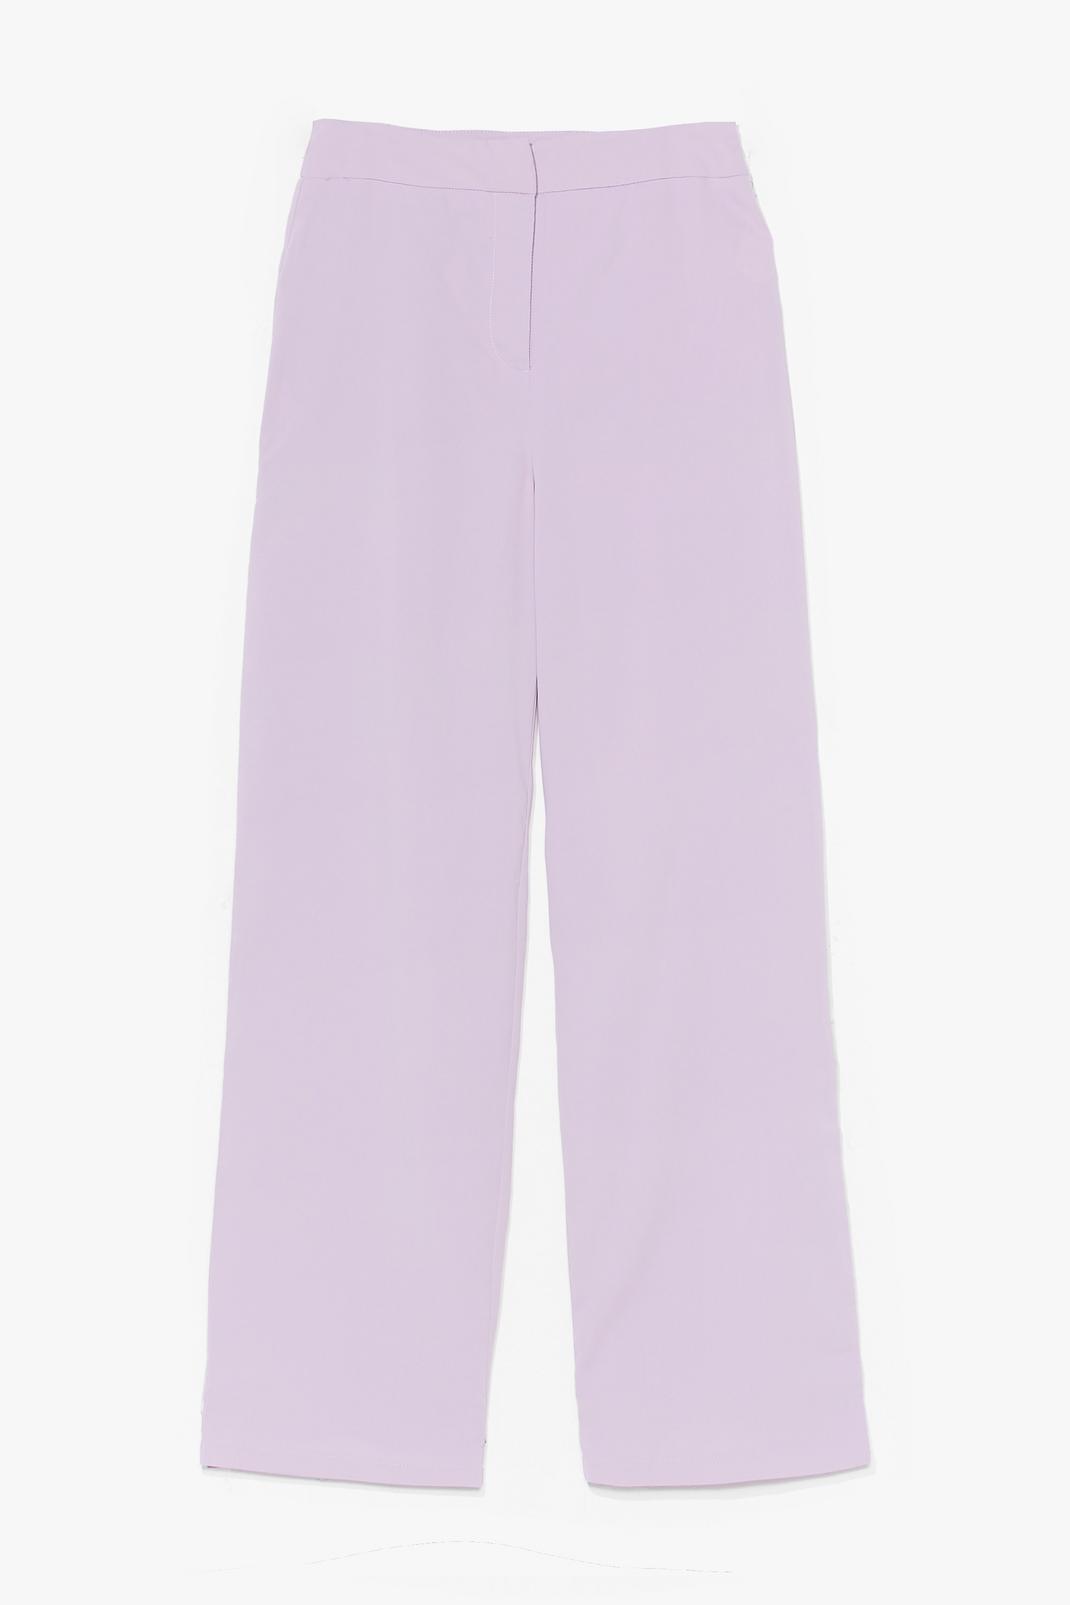 Lilac Let's Not Waist Time High-Waisted Pants image number 1